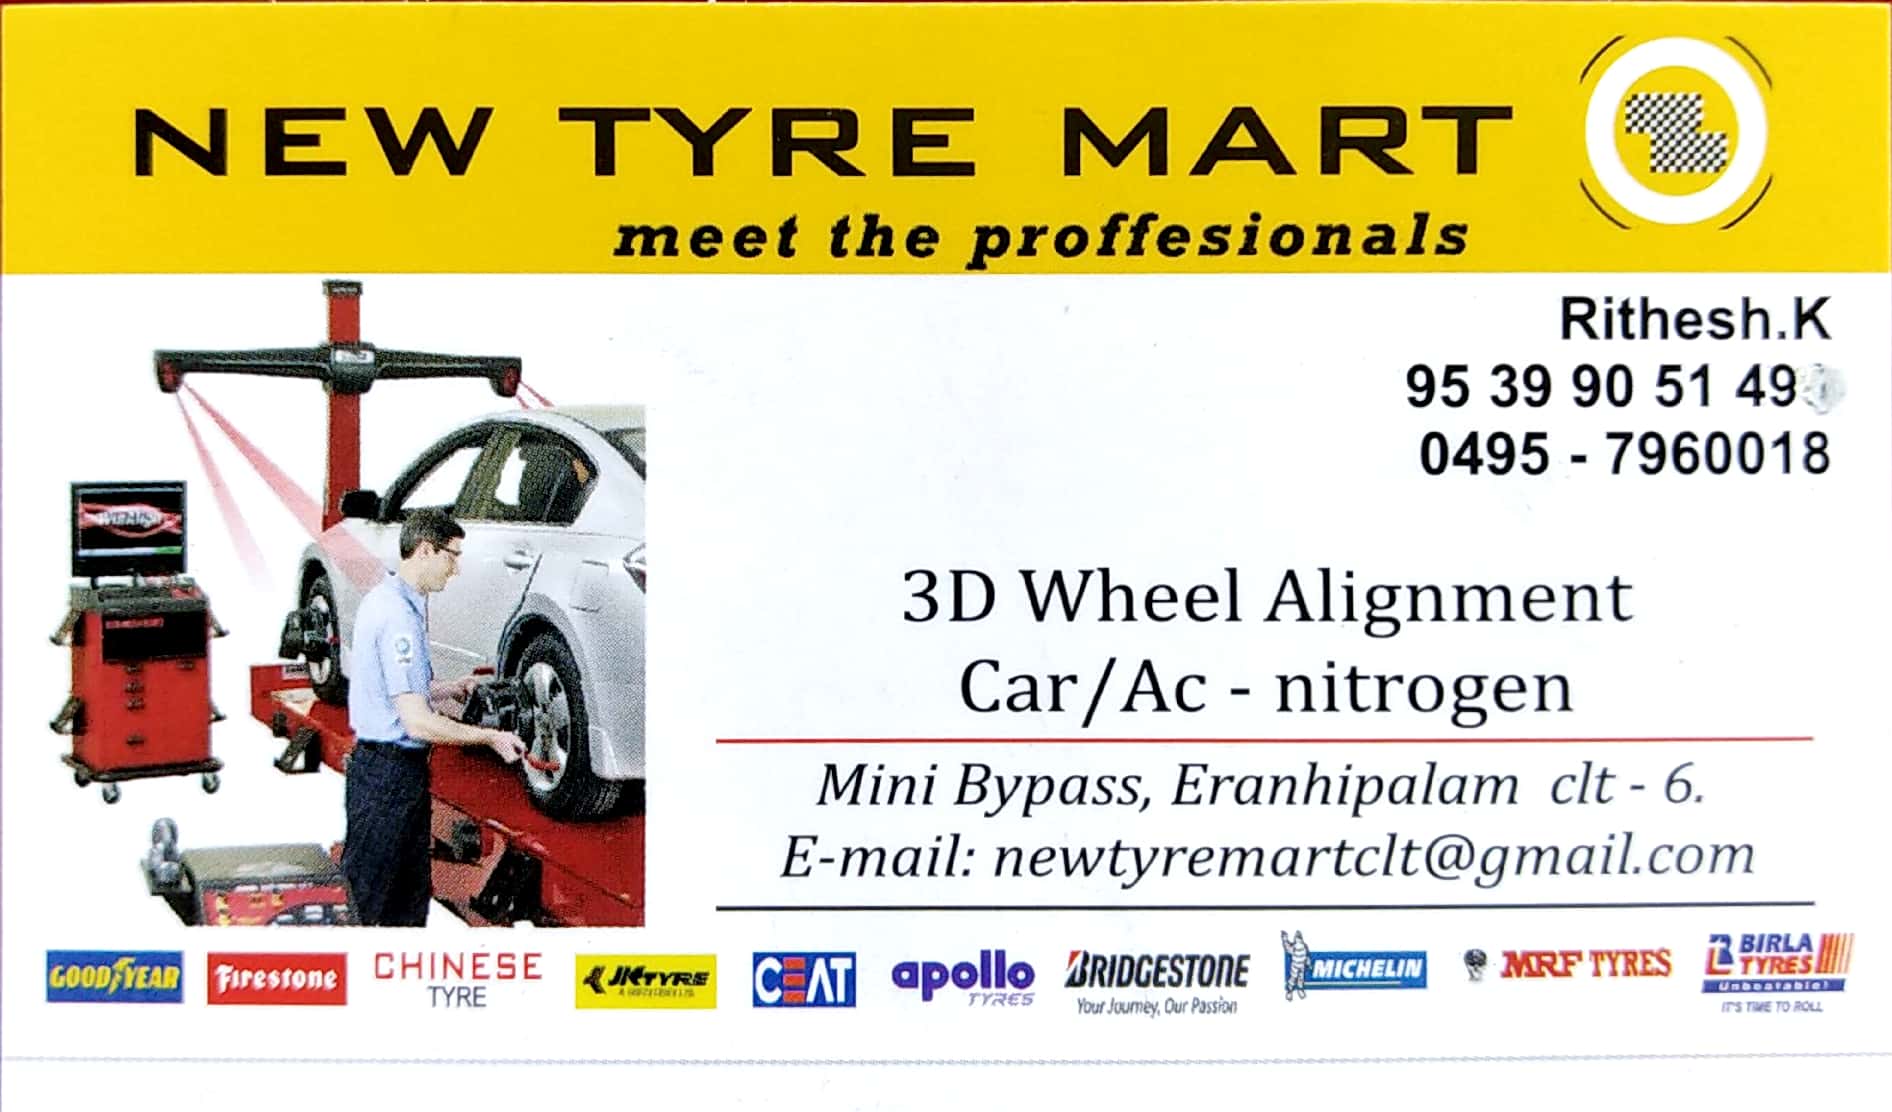 NEW TYRE MART, TYRE & PUNCTURE SHOP,  service in Eranhipalam, Kozhikode